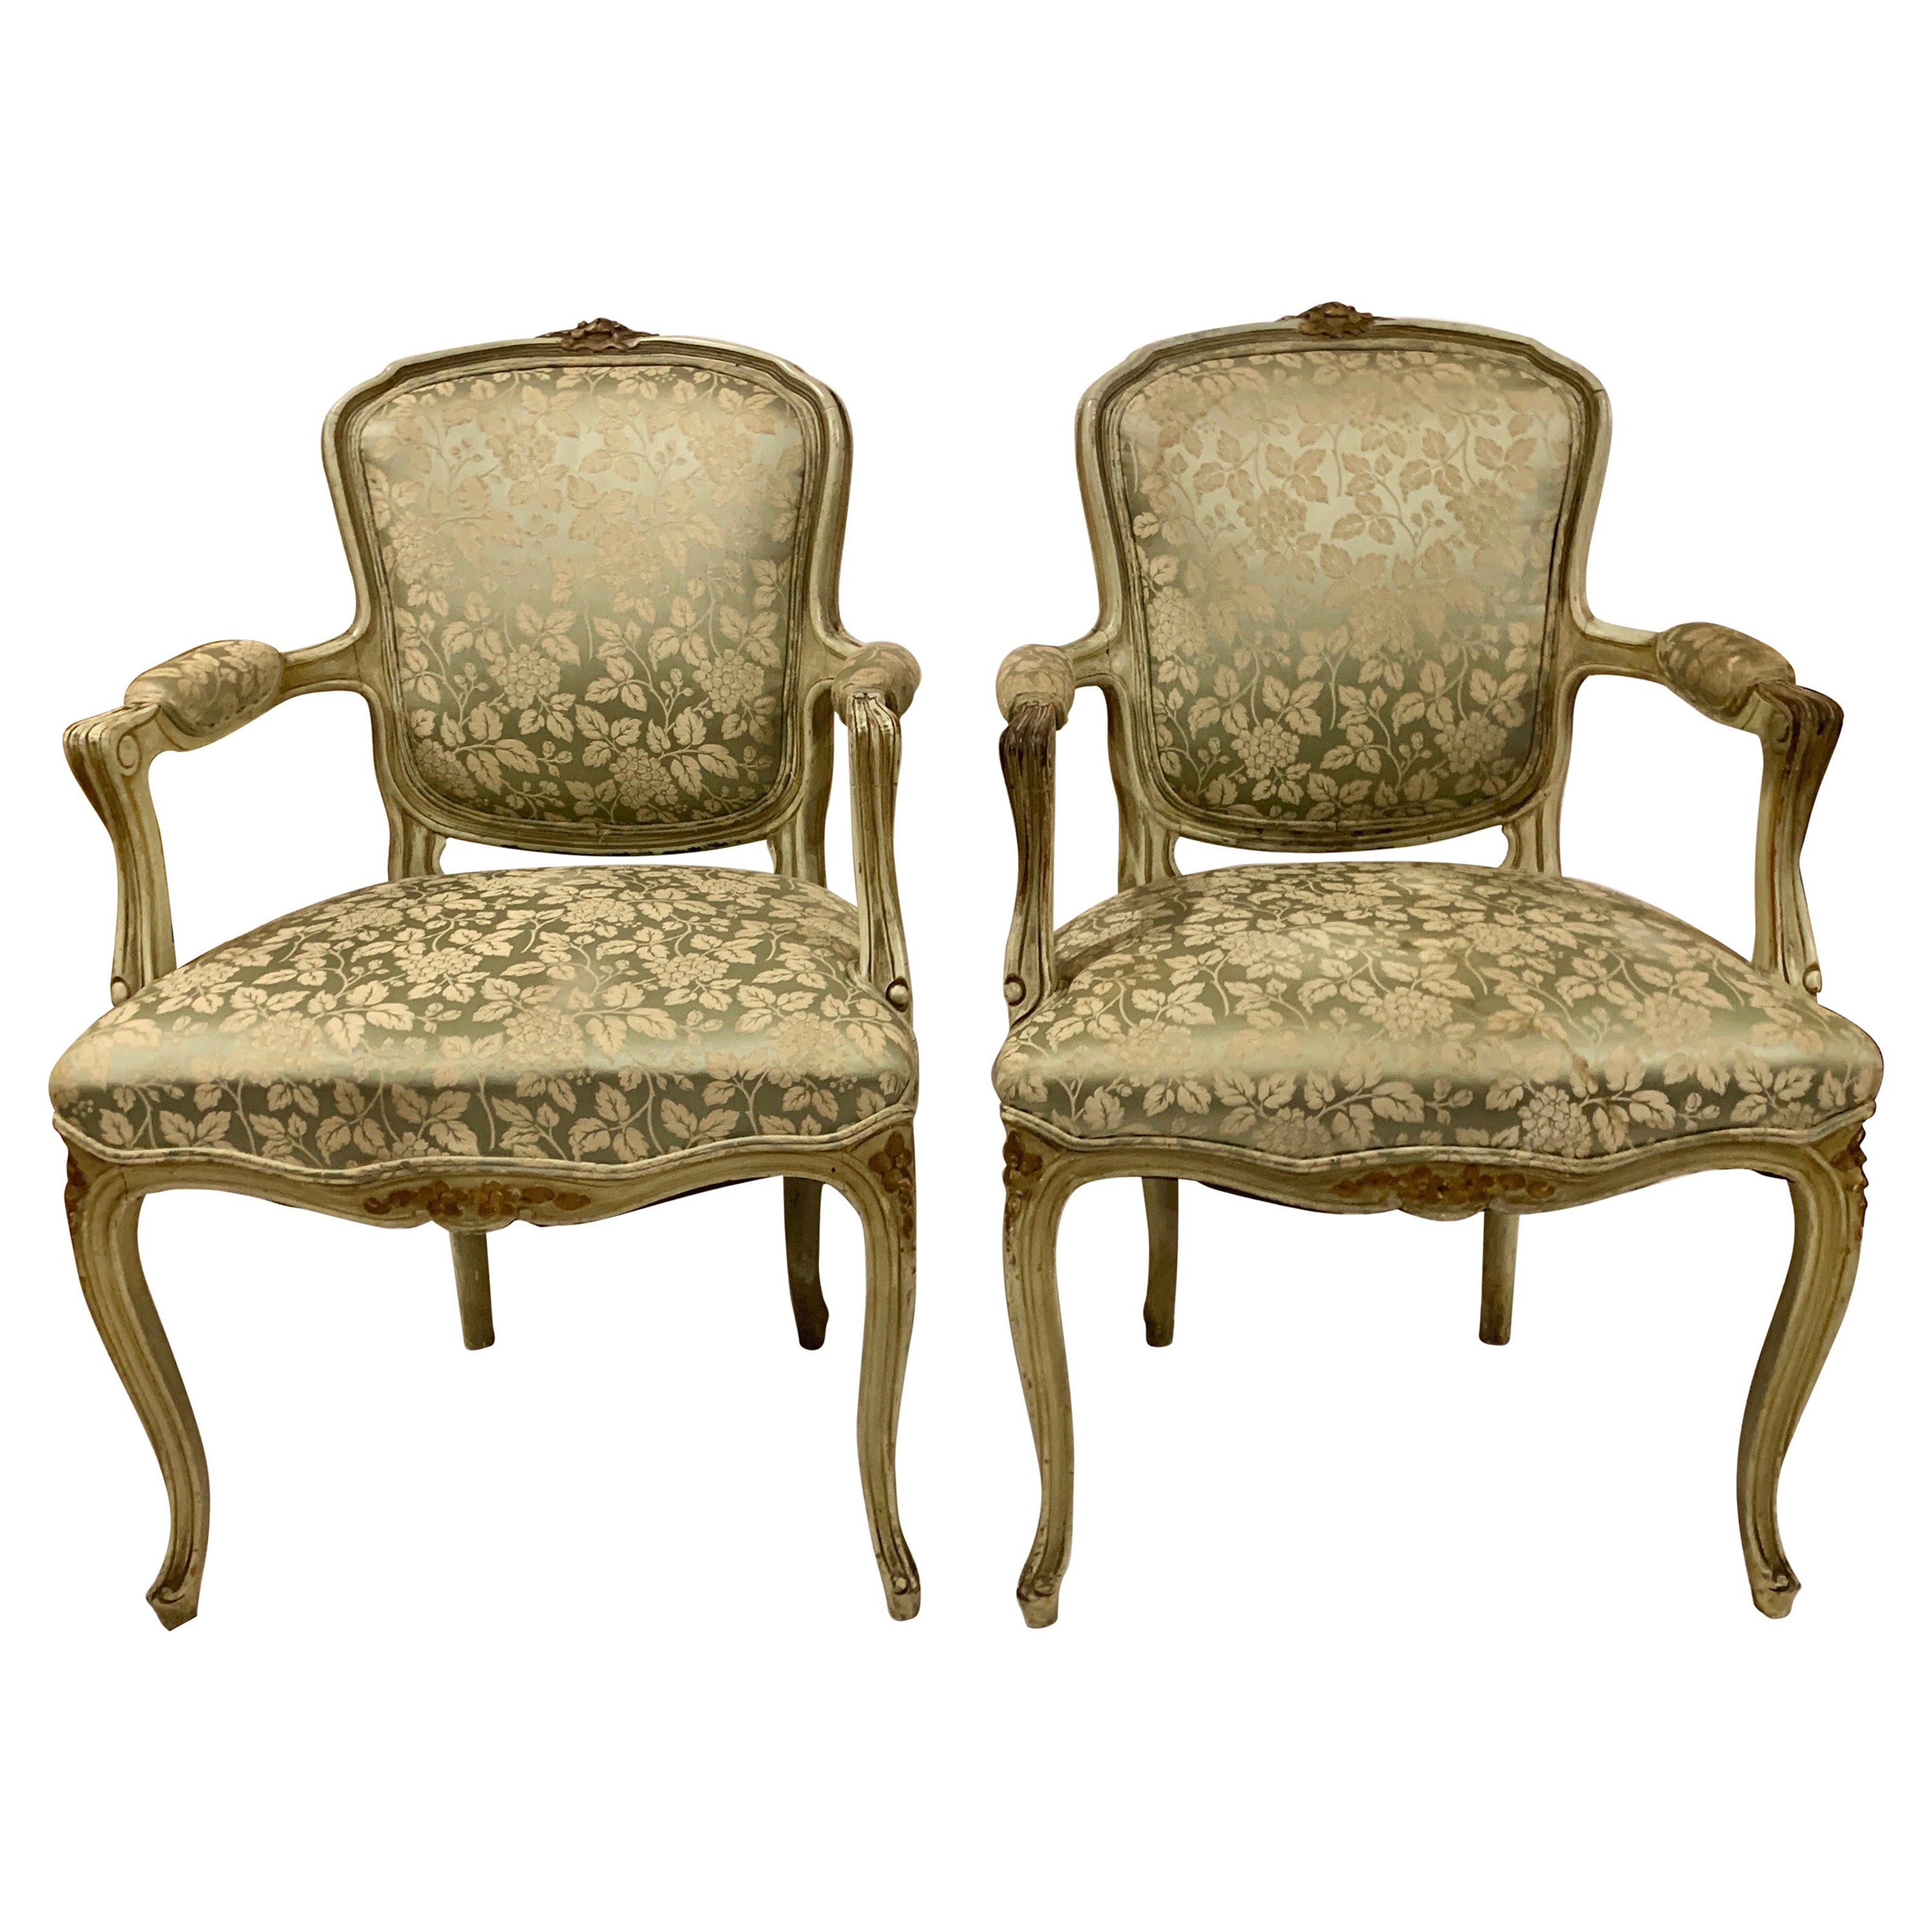 Pair of Antique French Painted Armchairs, circa 1900